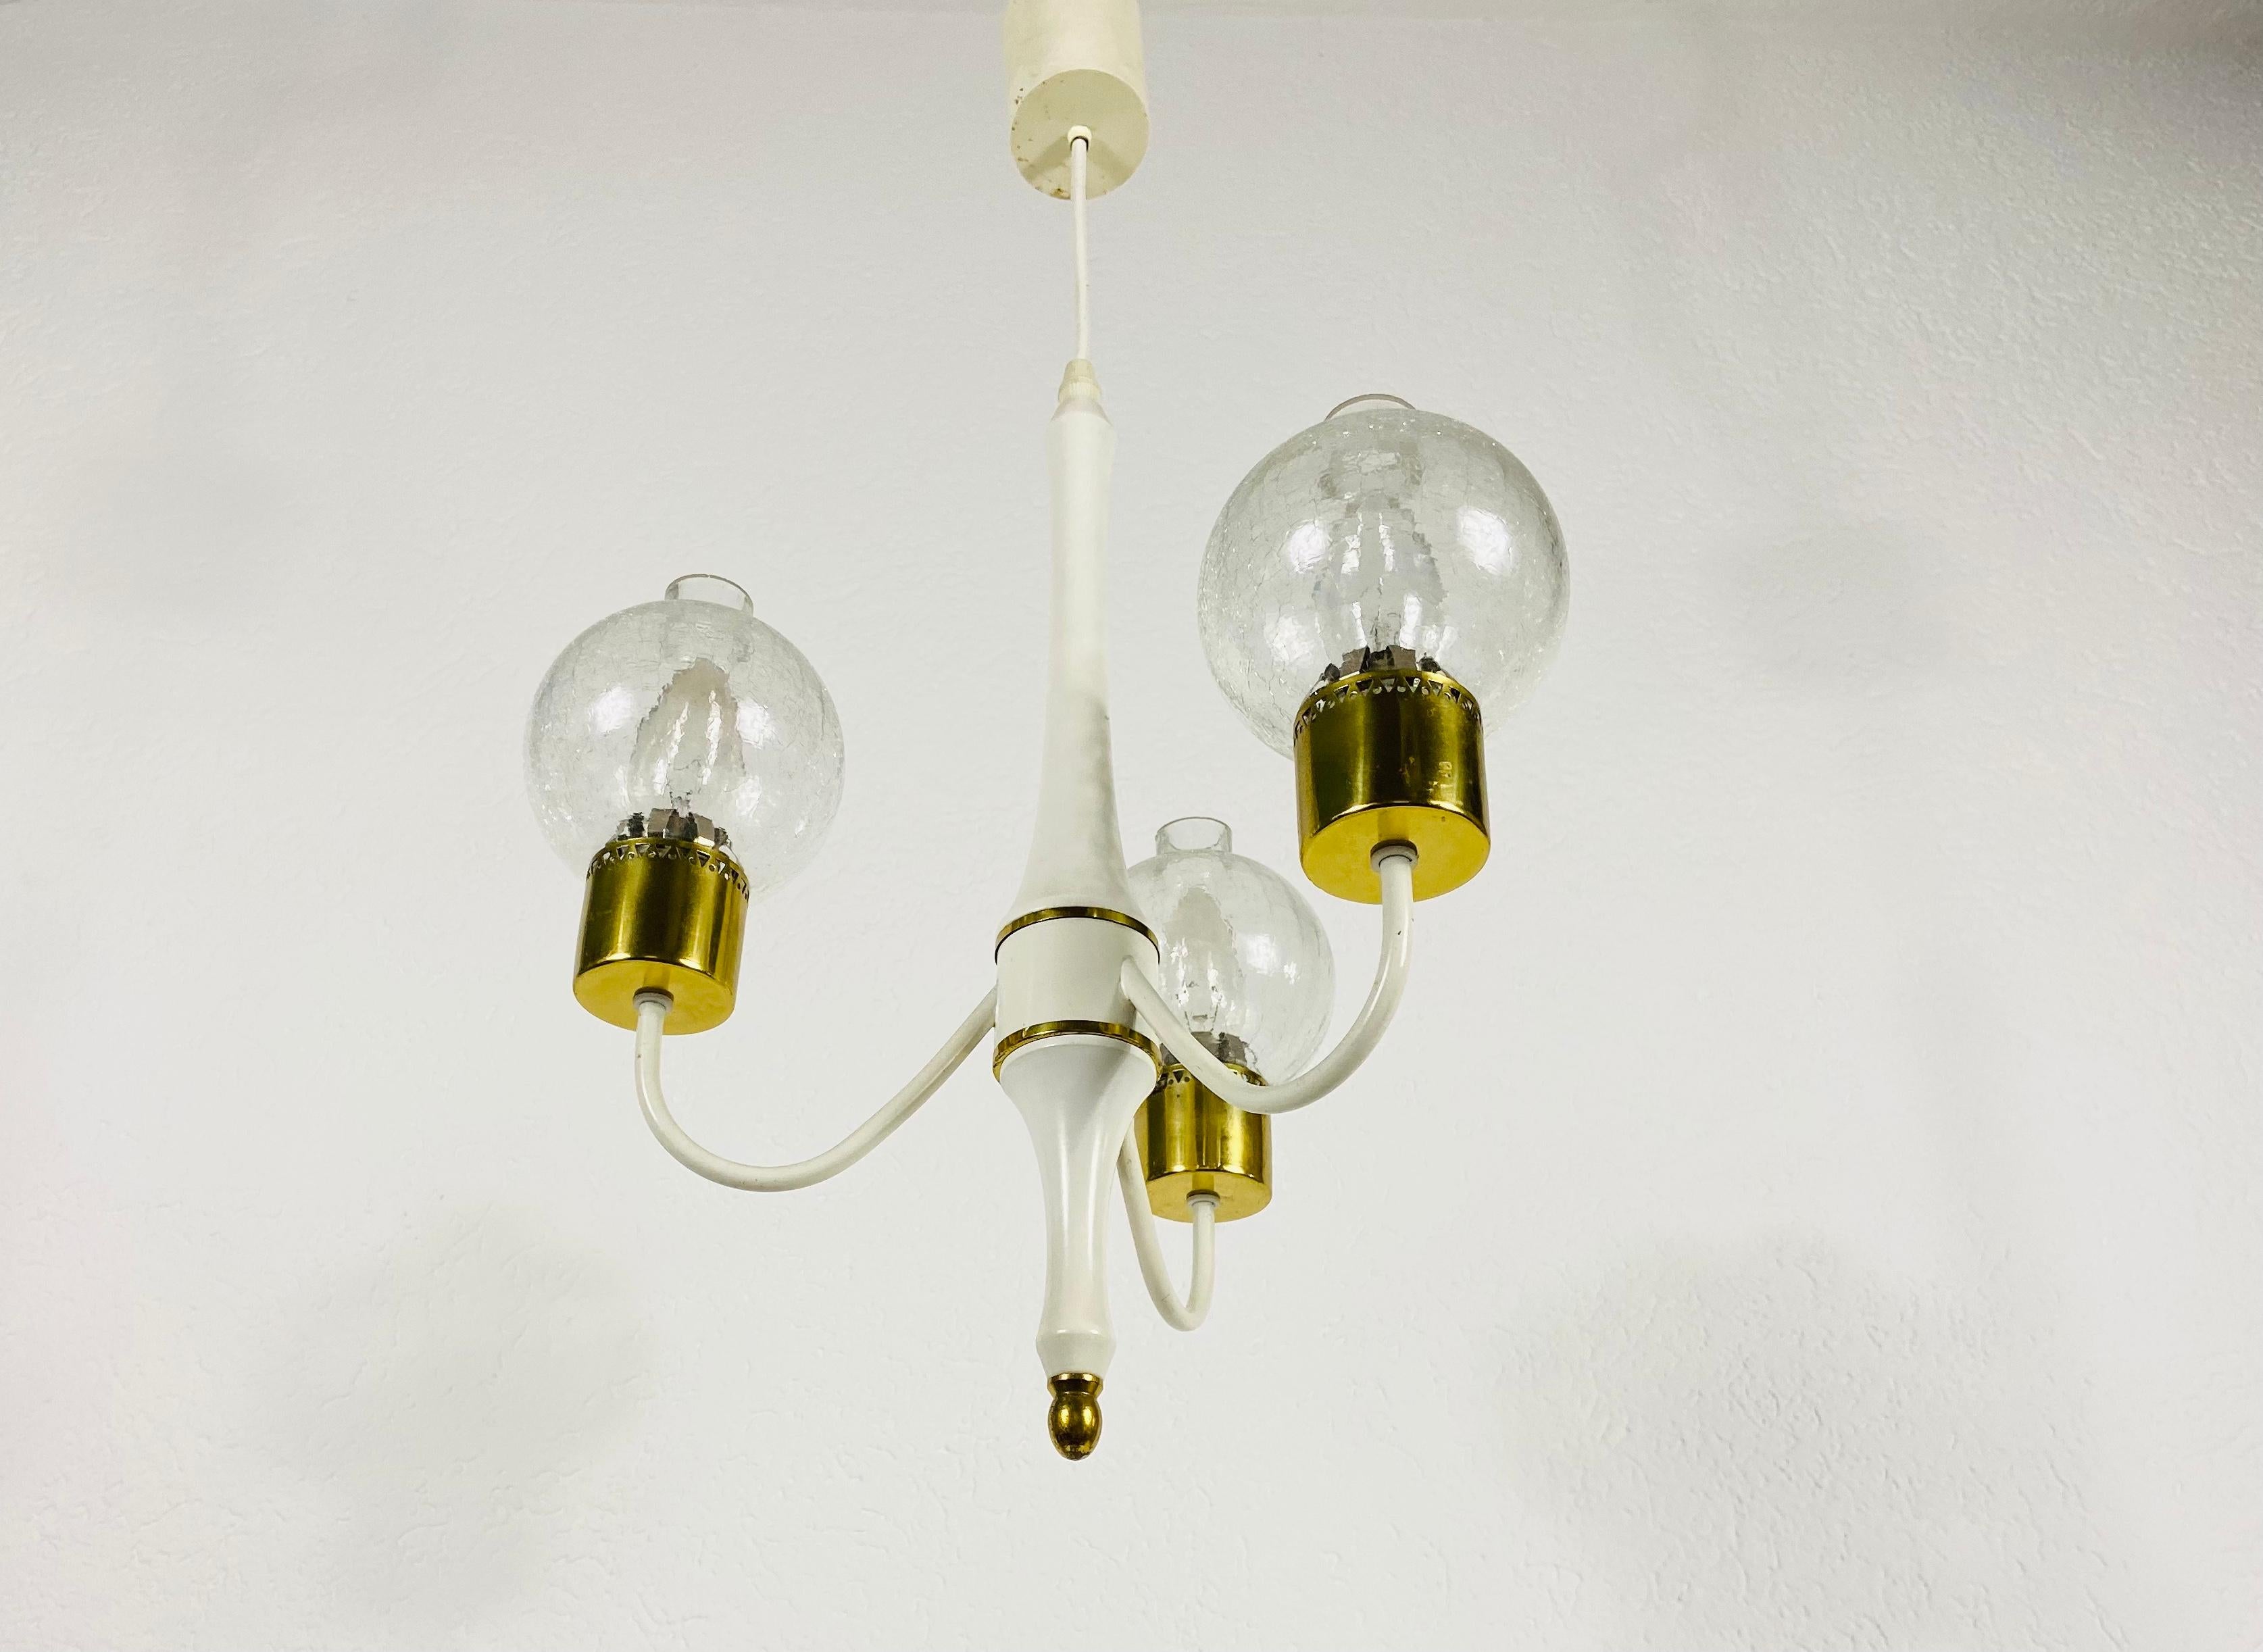 German Midcentury Brass and Glass 3-Arm Tulip Chandelier, 1960s For Sale